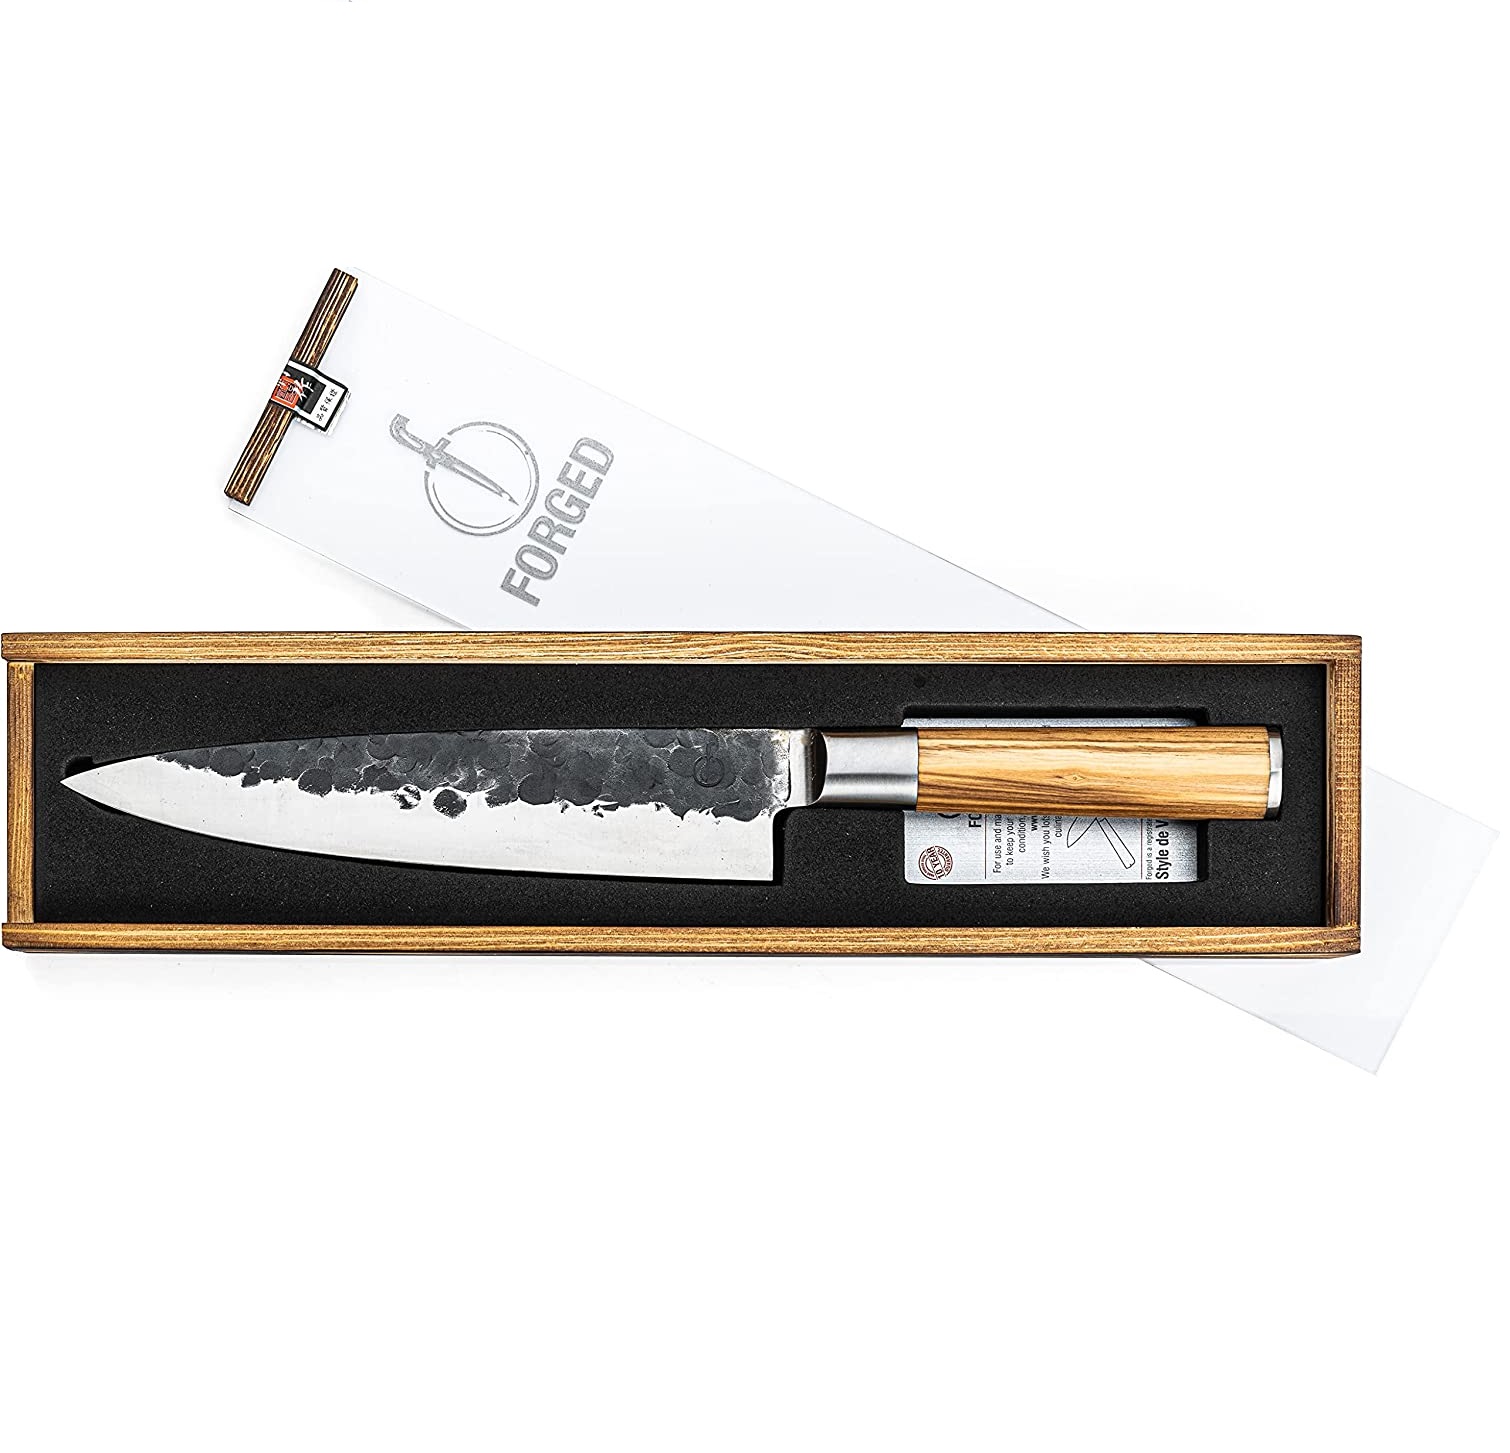 Hand forged butcher's knife with olive handle in luxury wooden box